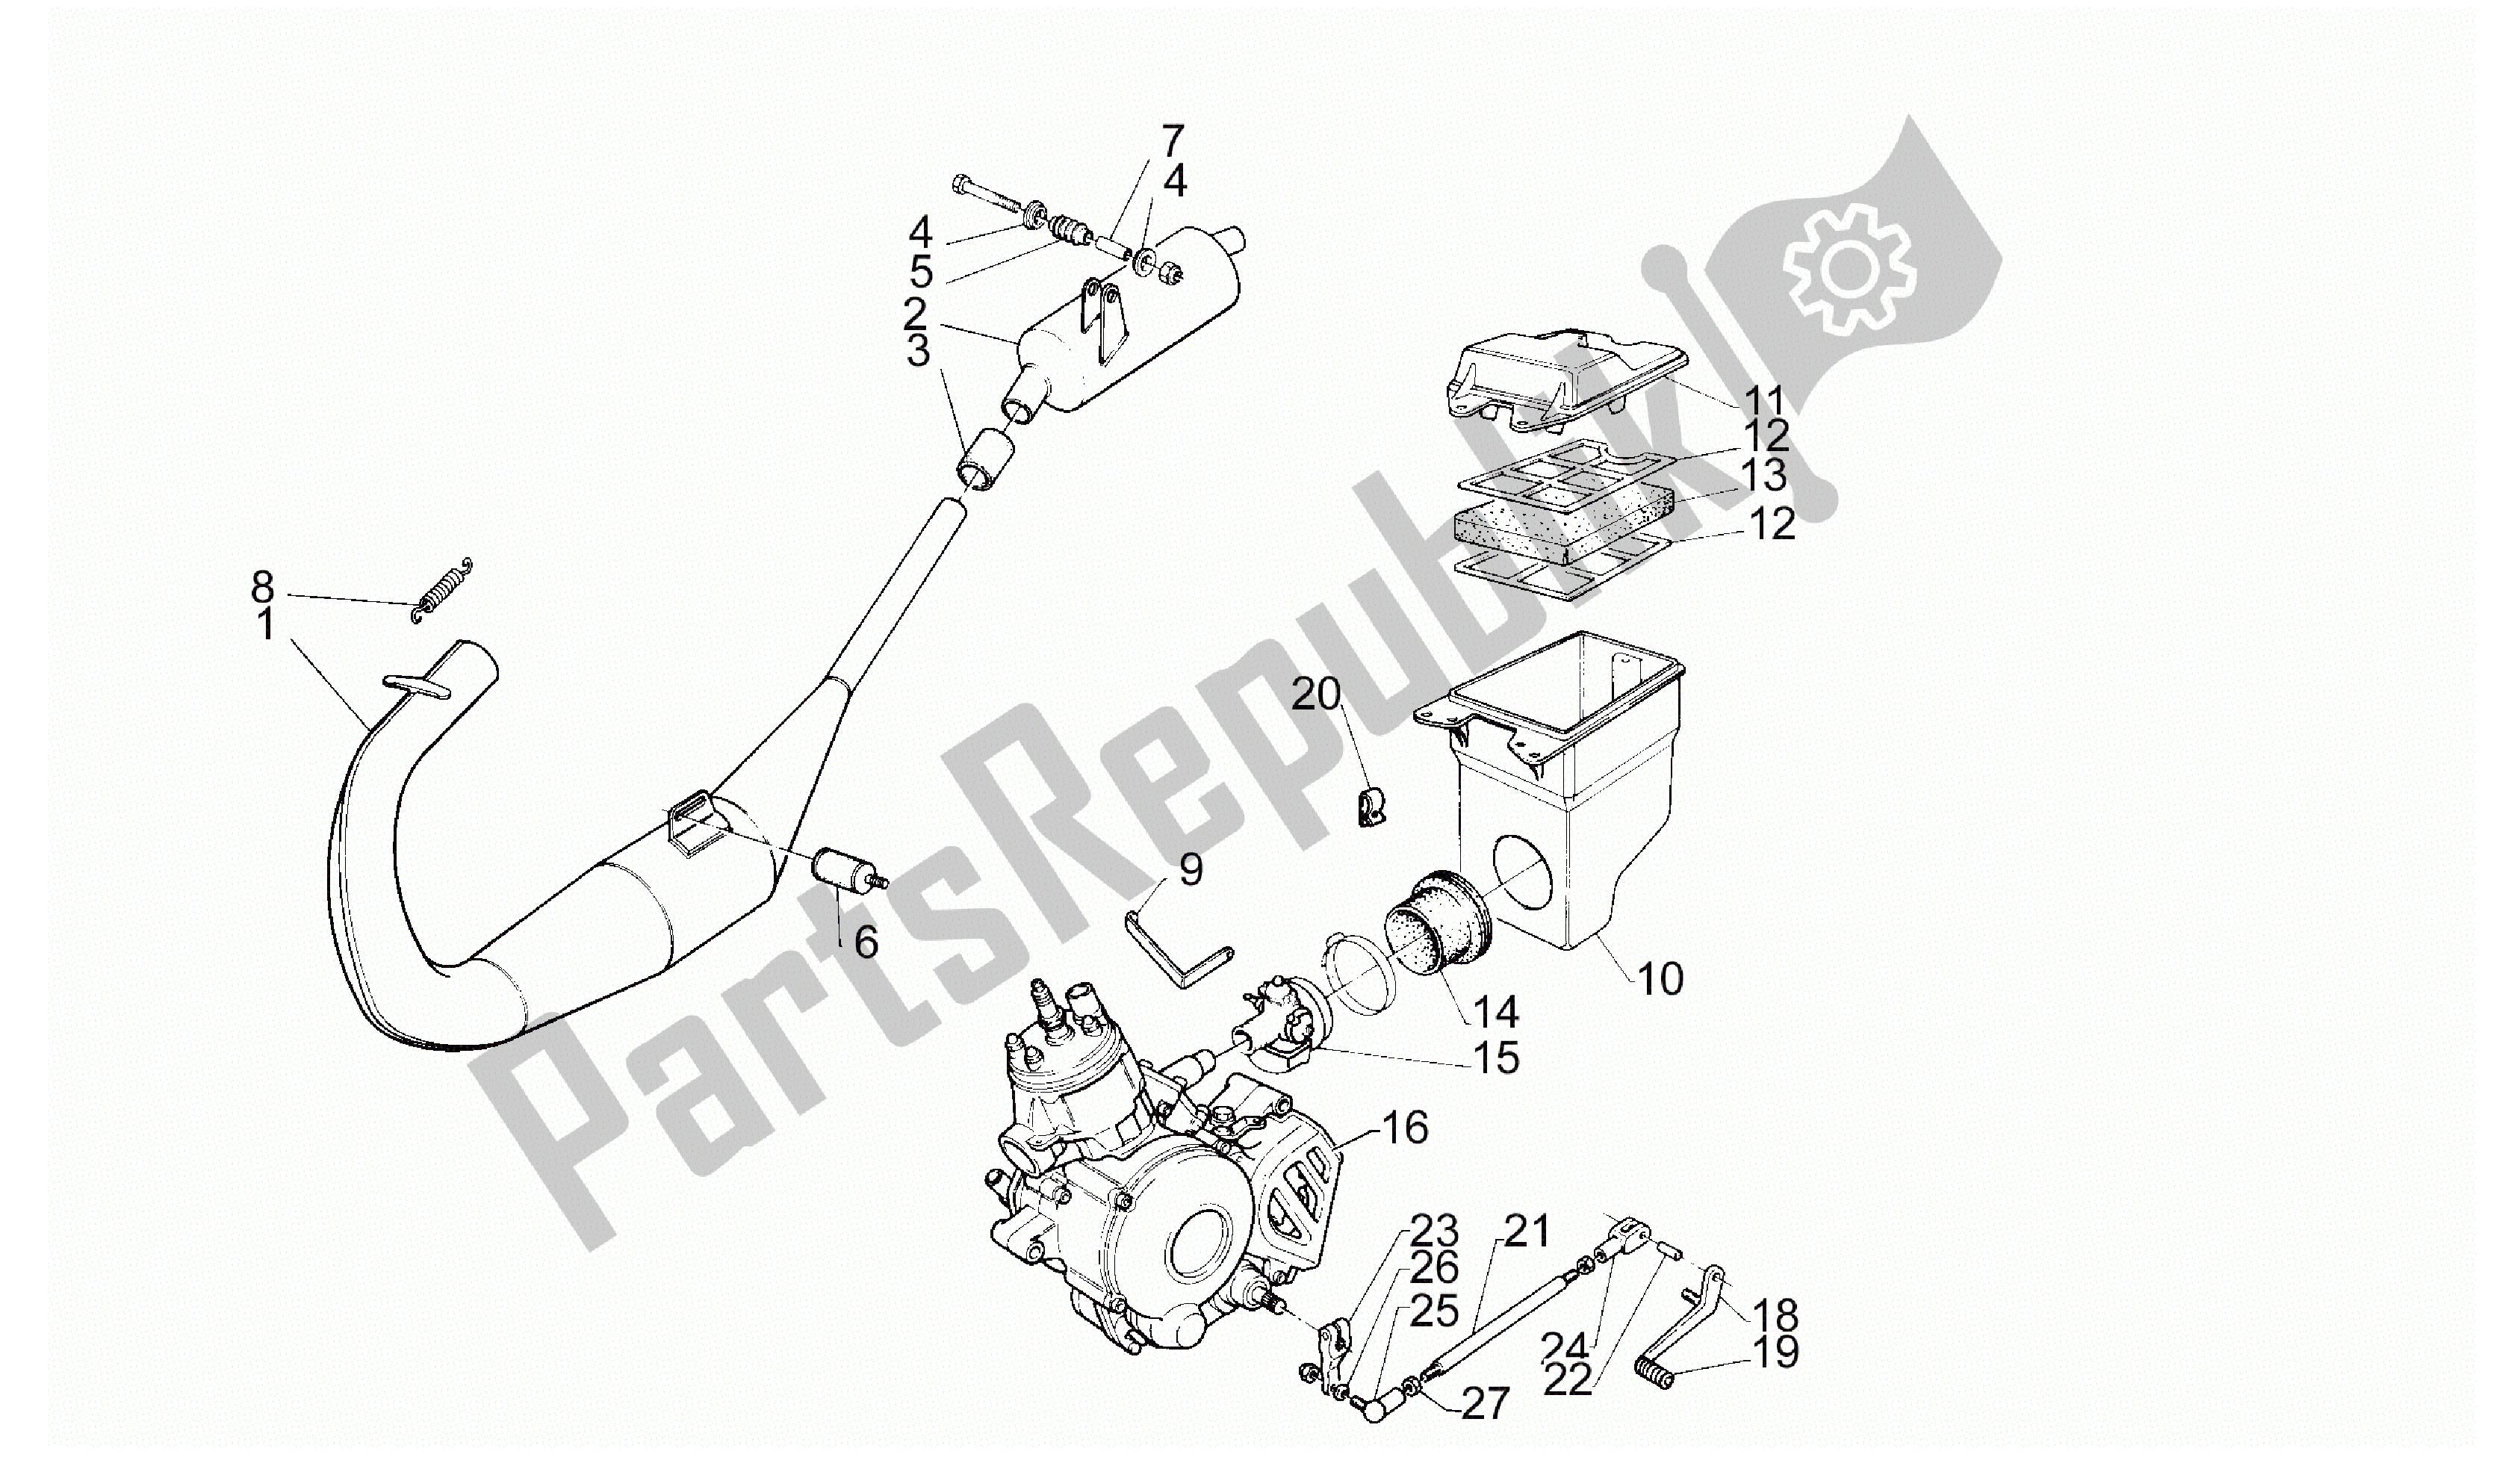 All parts for the Exhaust Unit of the Aprilia RS 50 1993 - 1995